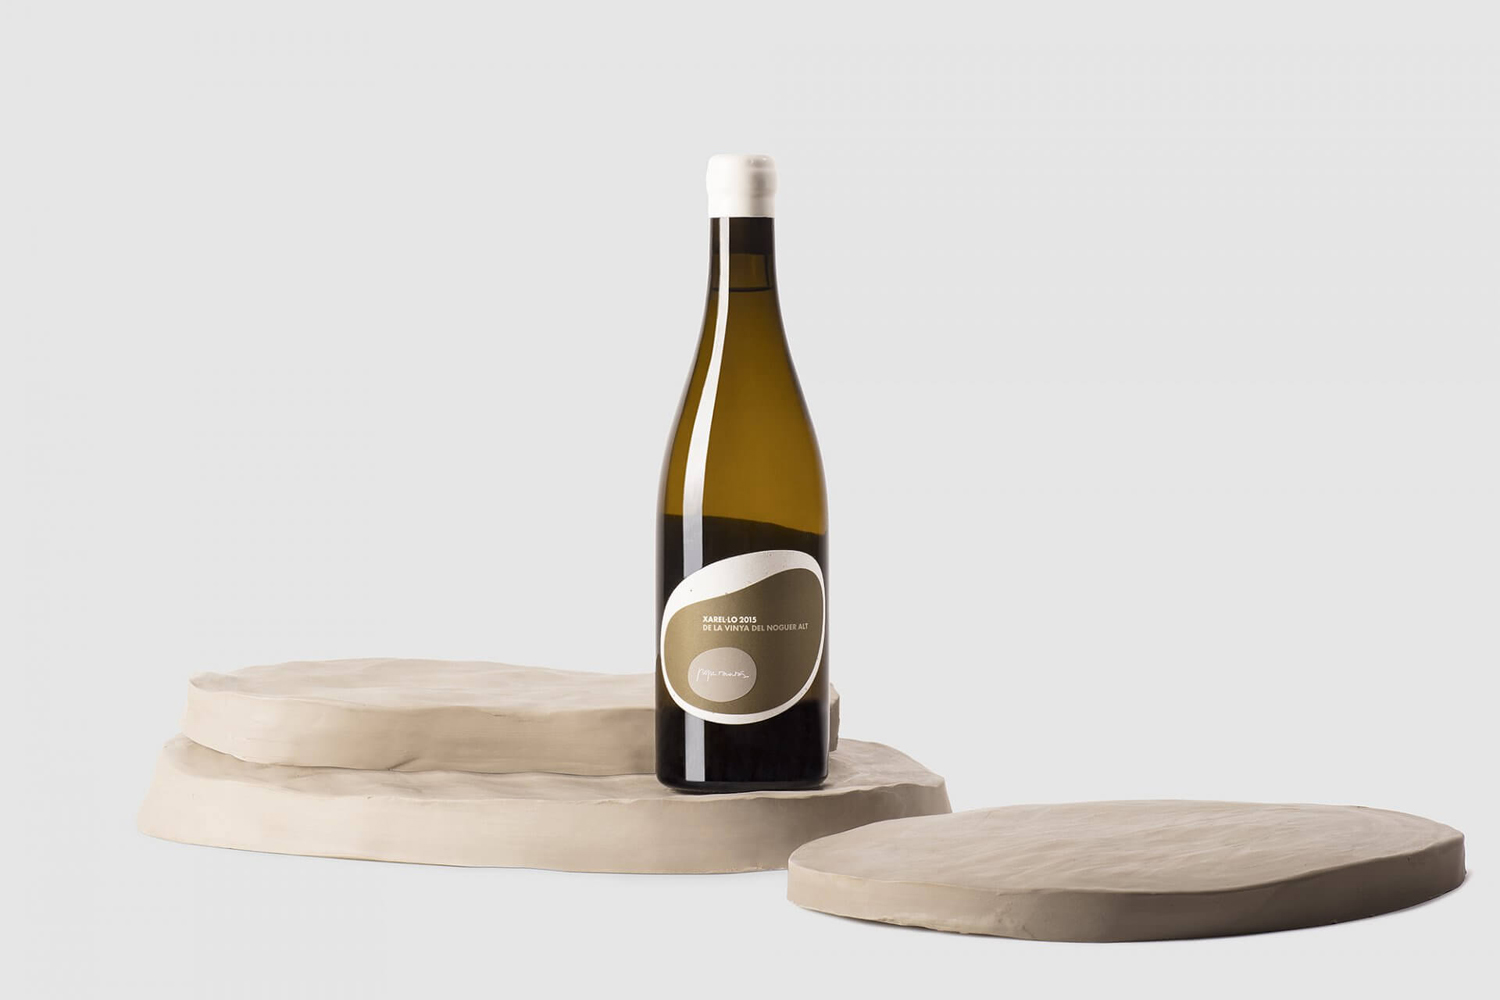 Packaging design by Mucho for natural wine range by Pepe Raventós